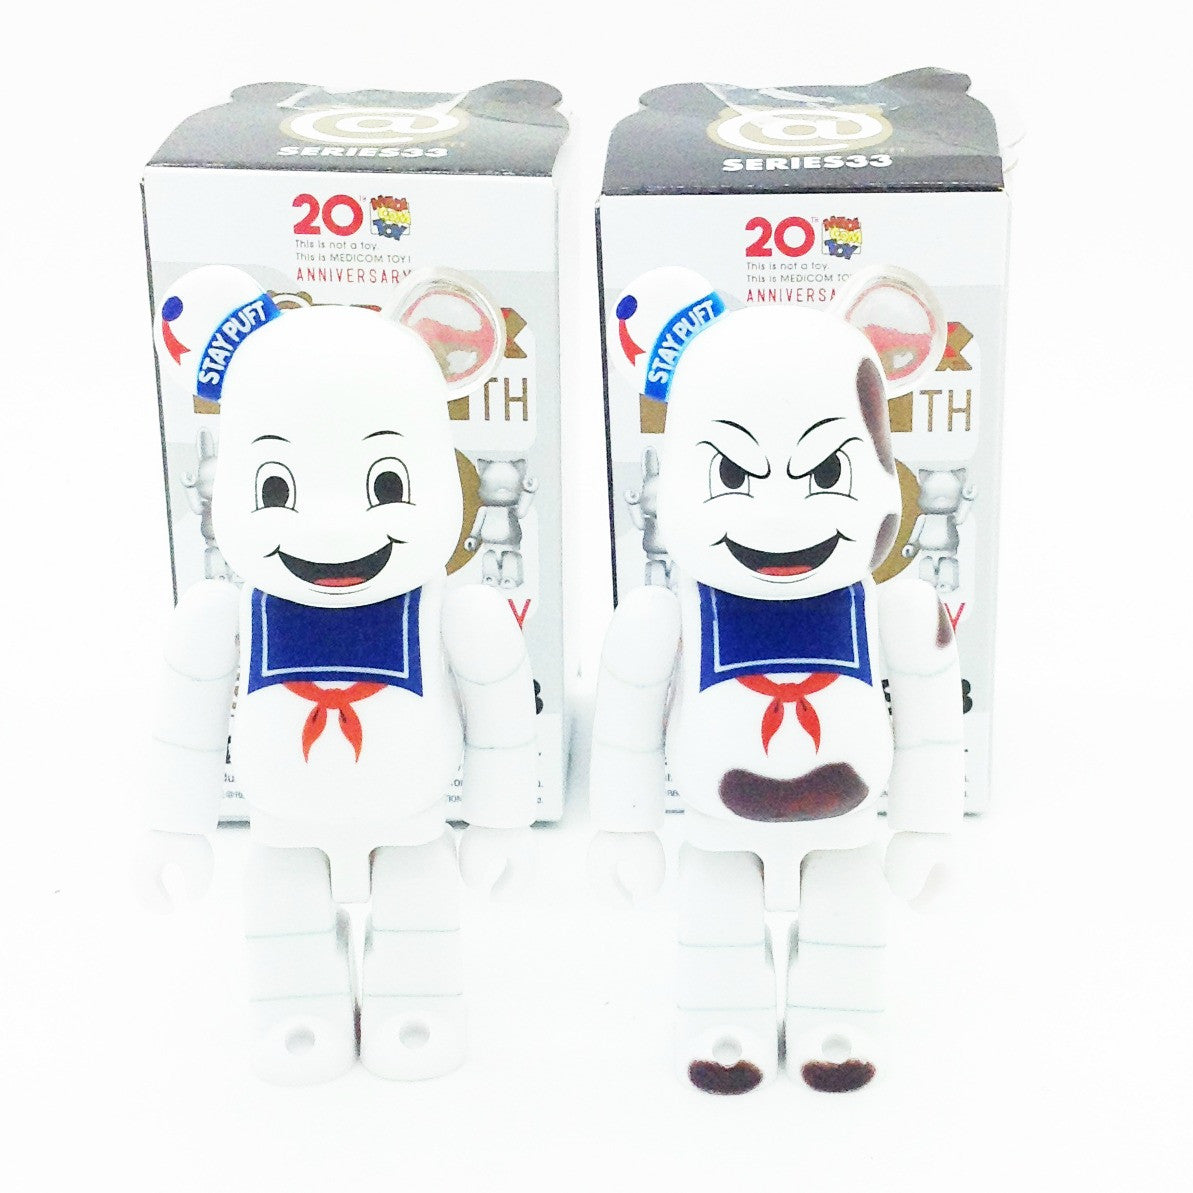 Bearbrick Series 33 - Ghostbusters Stay Puft Marshmallow Man and